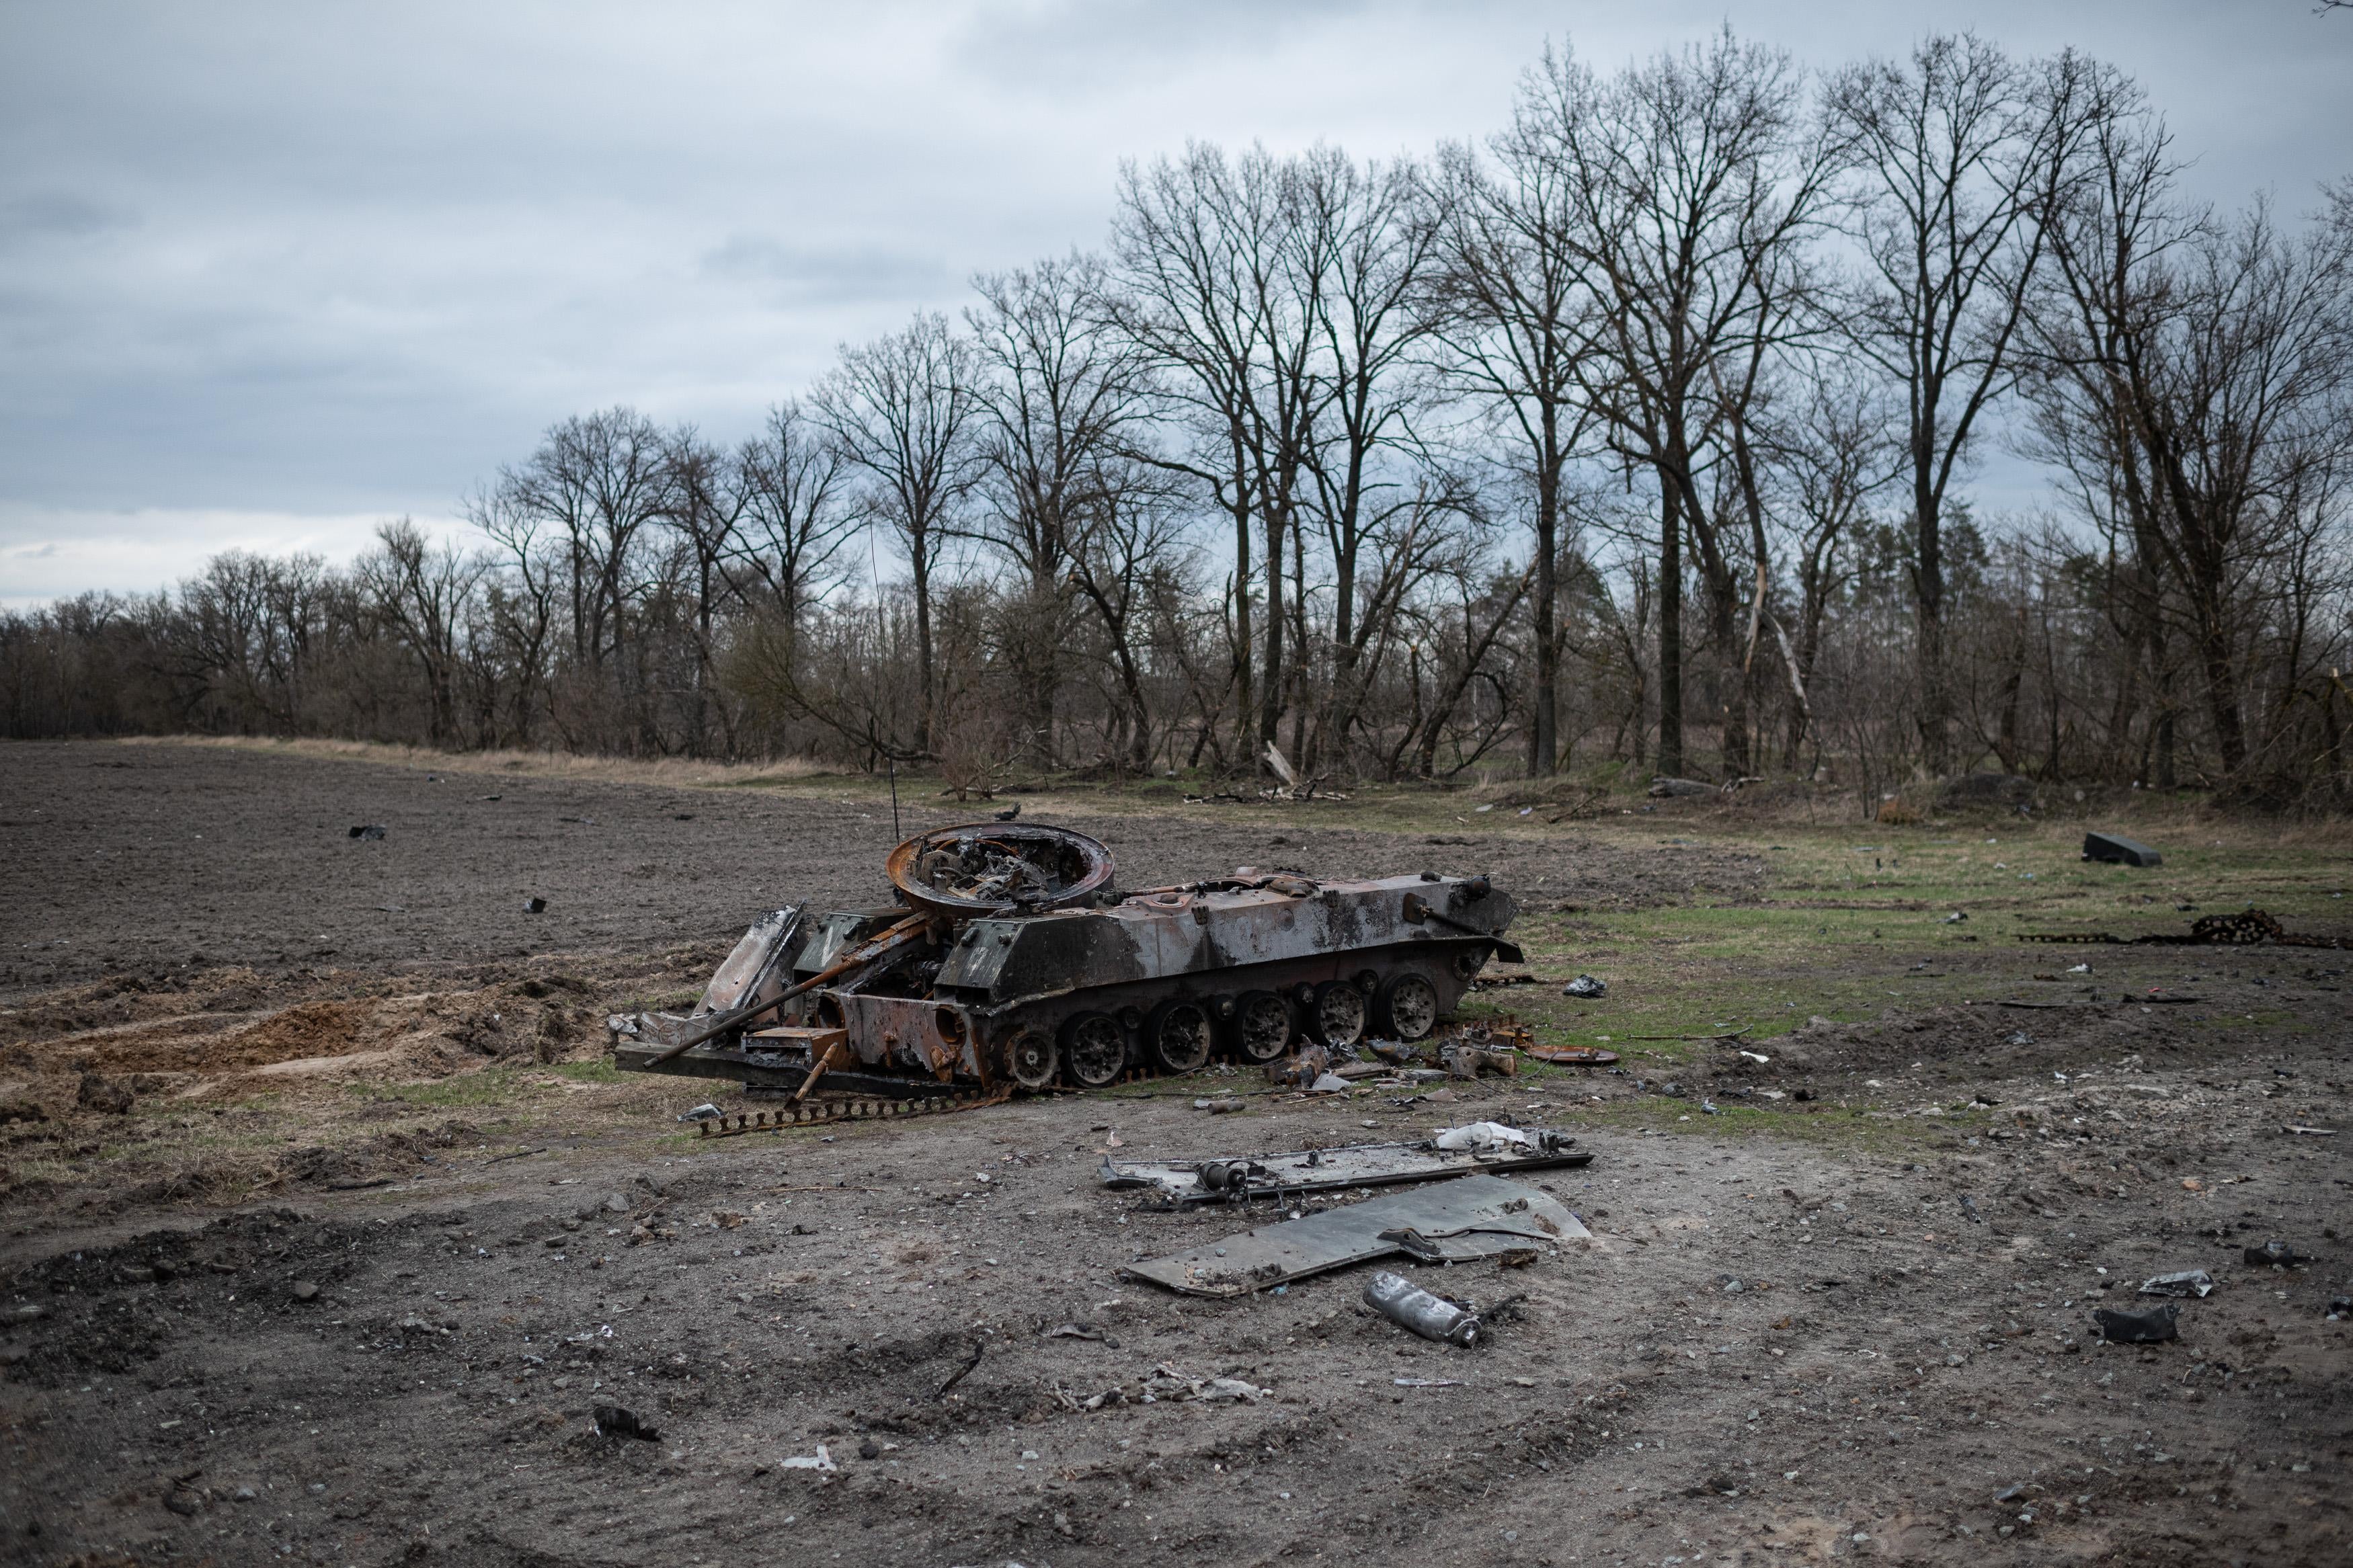 A burnt tank in the middle of an empty field.